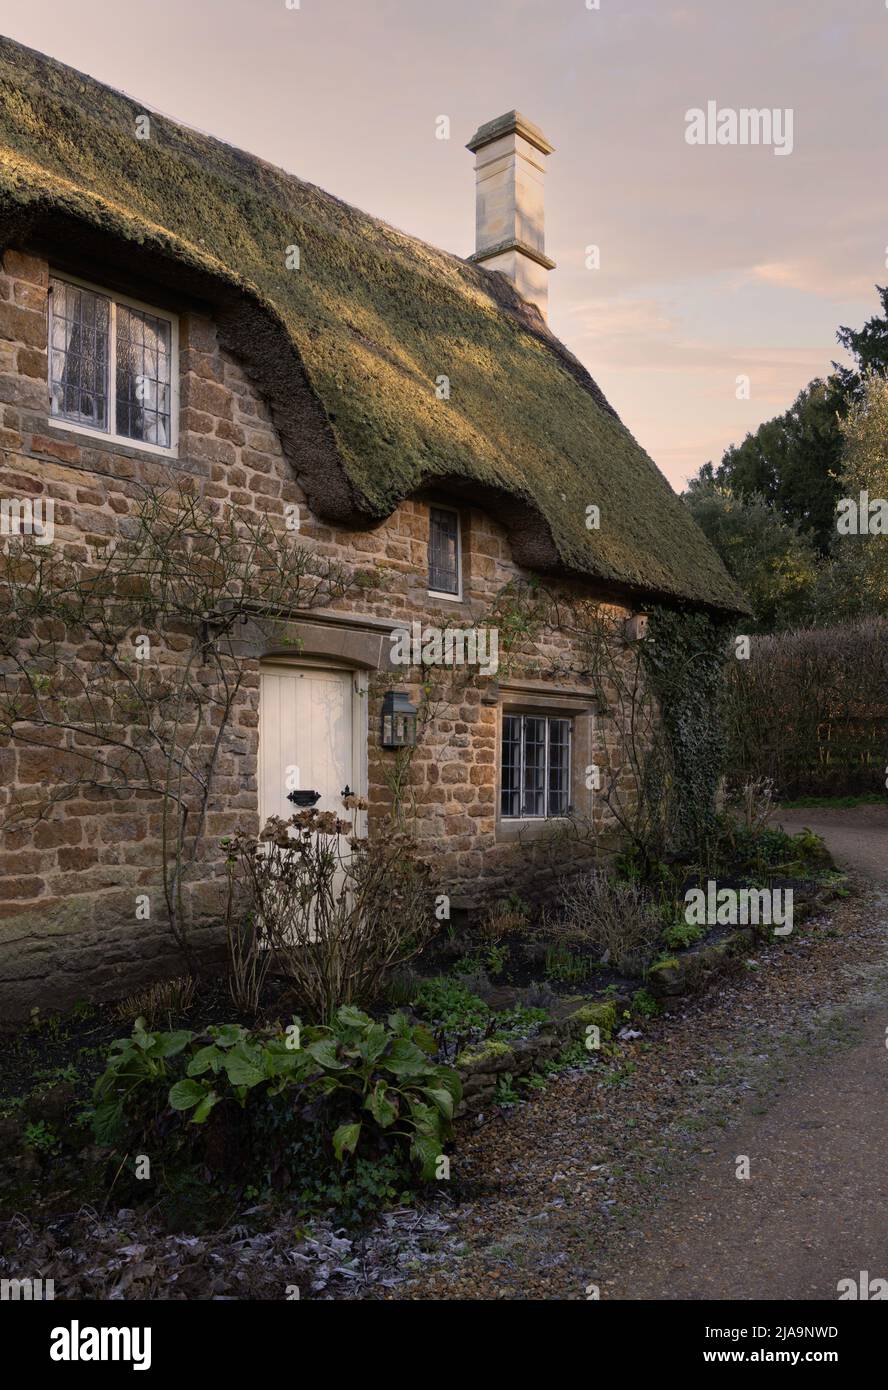 Cotswold Cottage in Great Tew, Oxfordshire, England. Stockfoto